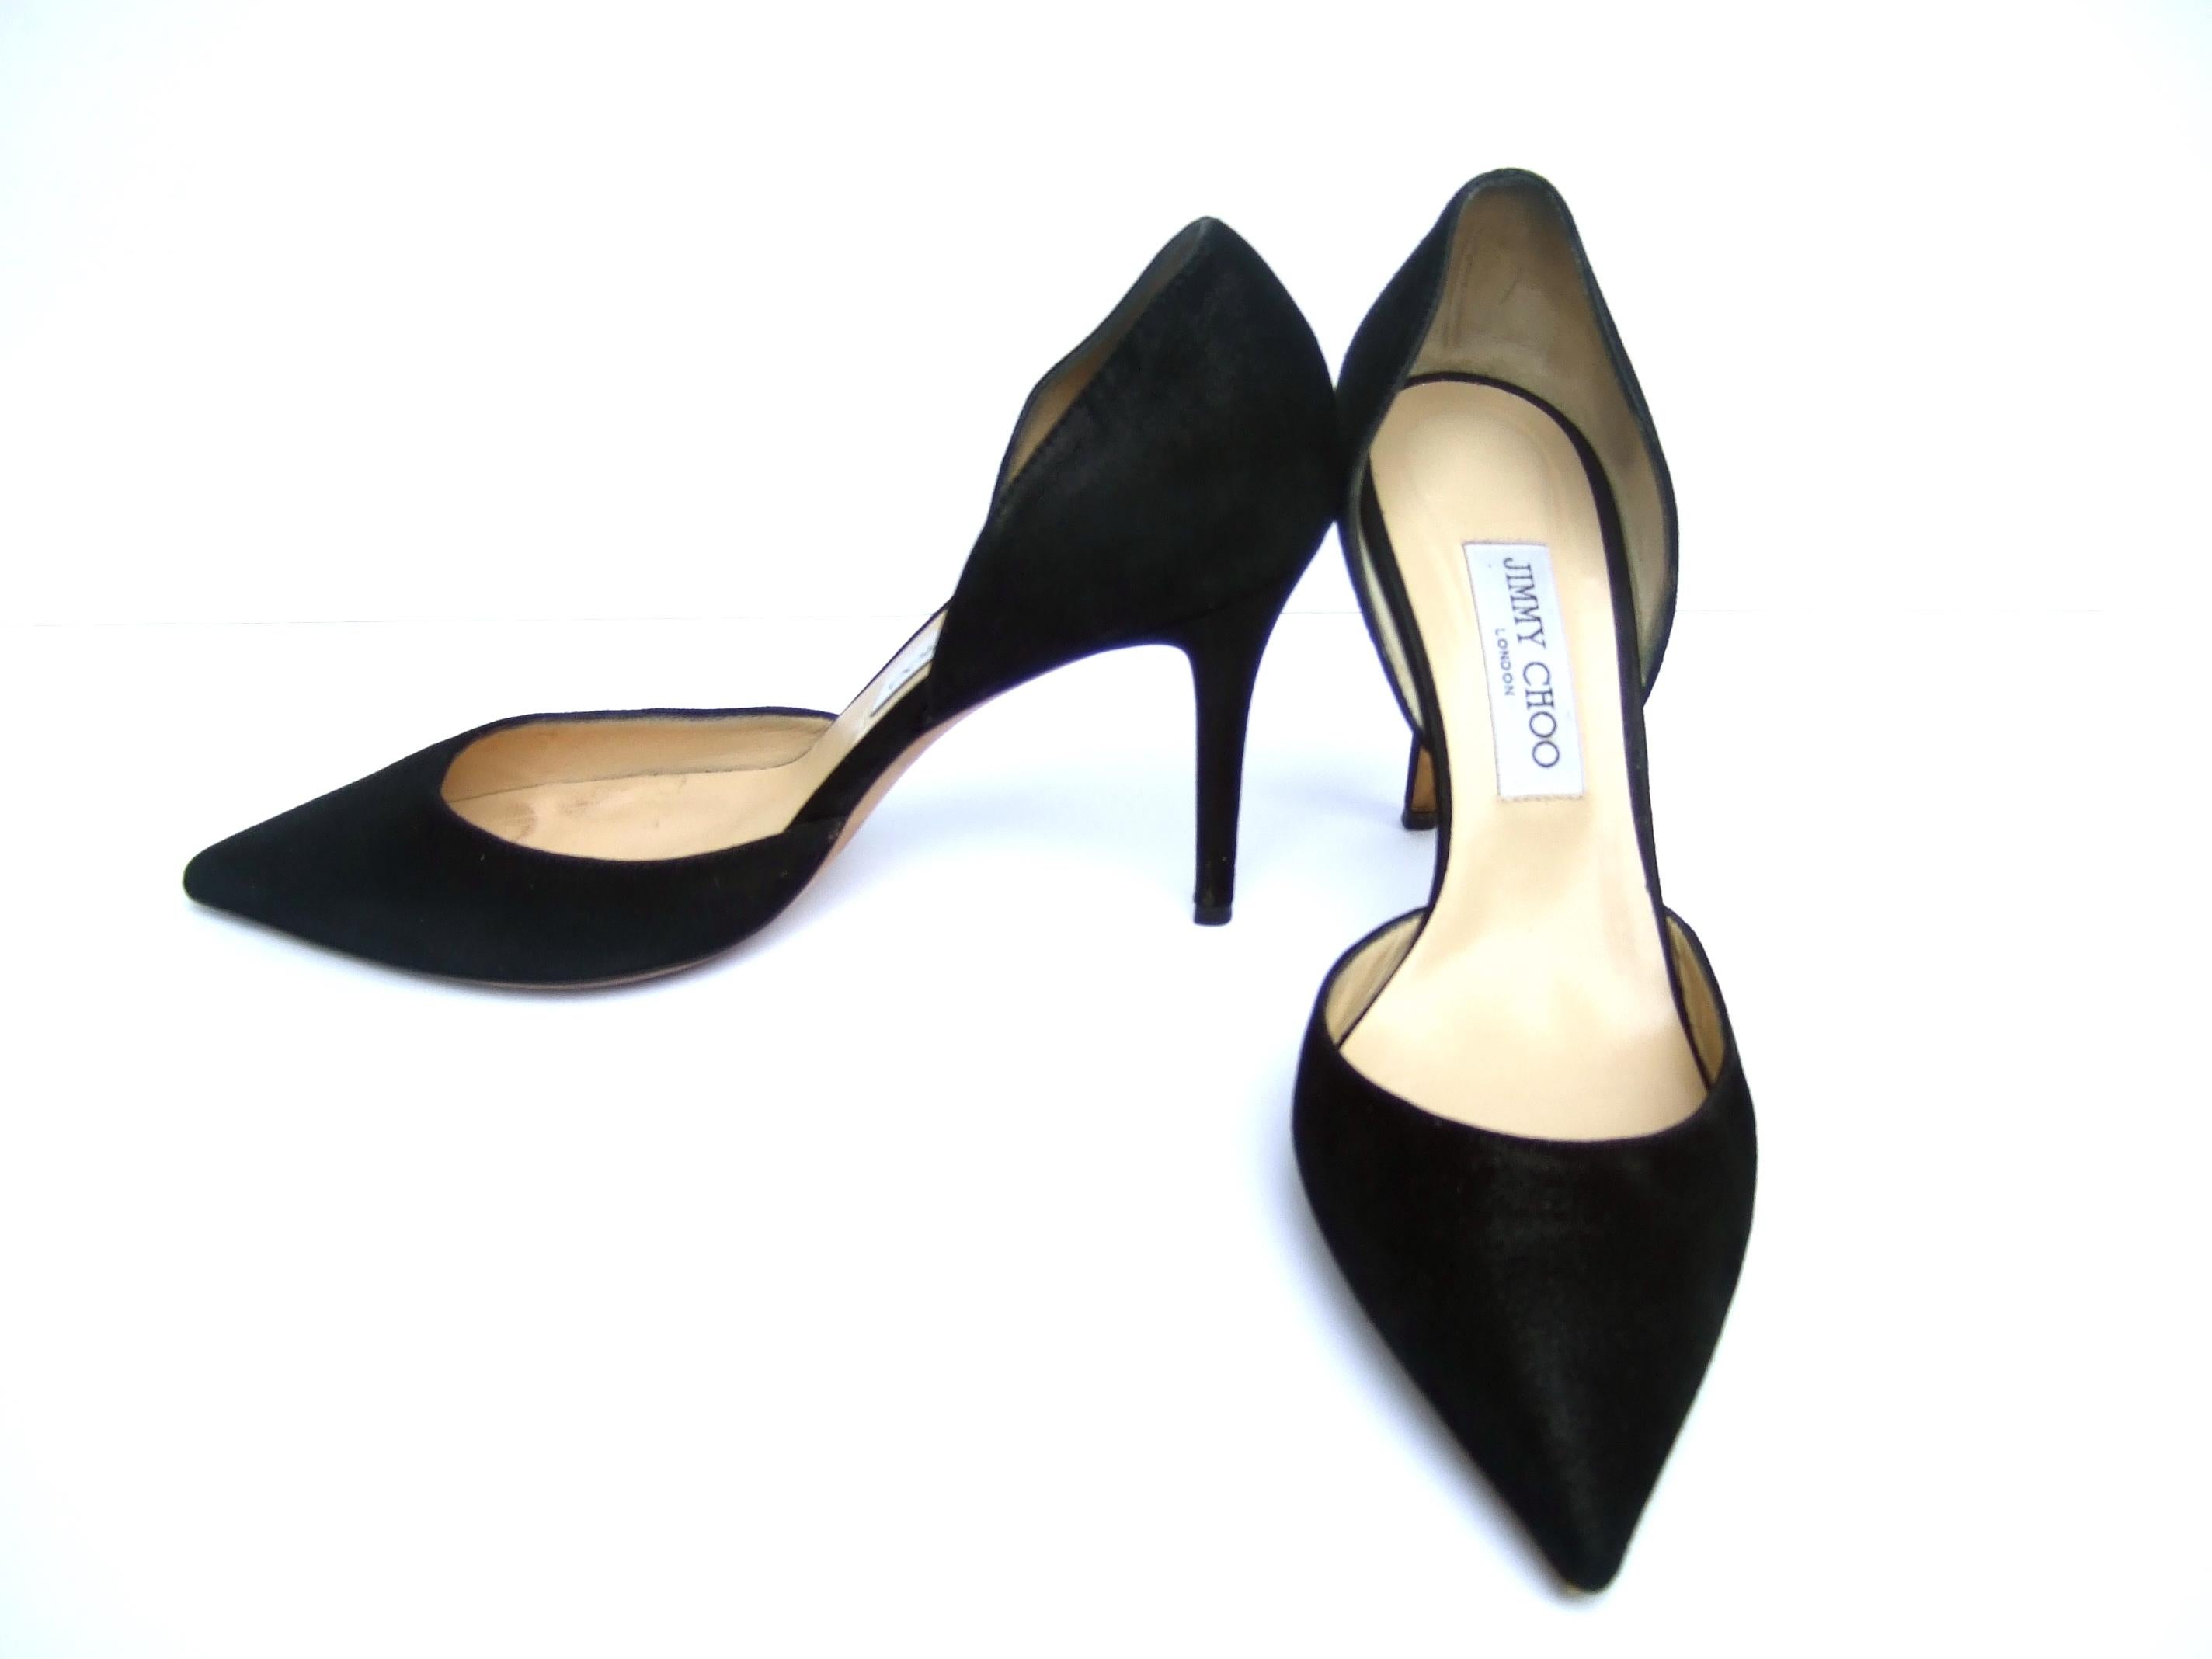 Jimmy Choo London Italian black brushed leather stiletto spike pumps Size 40 c 1990s
The classic black leather pumps are designed with brushed black leather 
with a slight matte sheen 

Designed by Jimmy Choo London Made in Italy Size 40
The